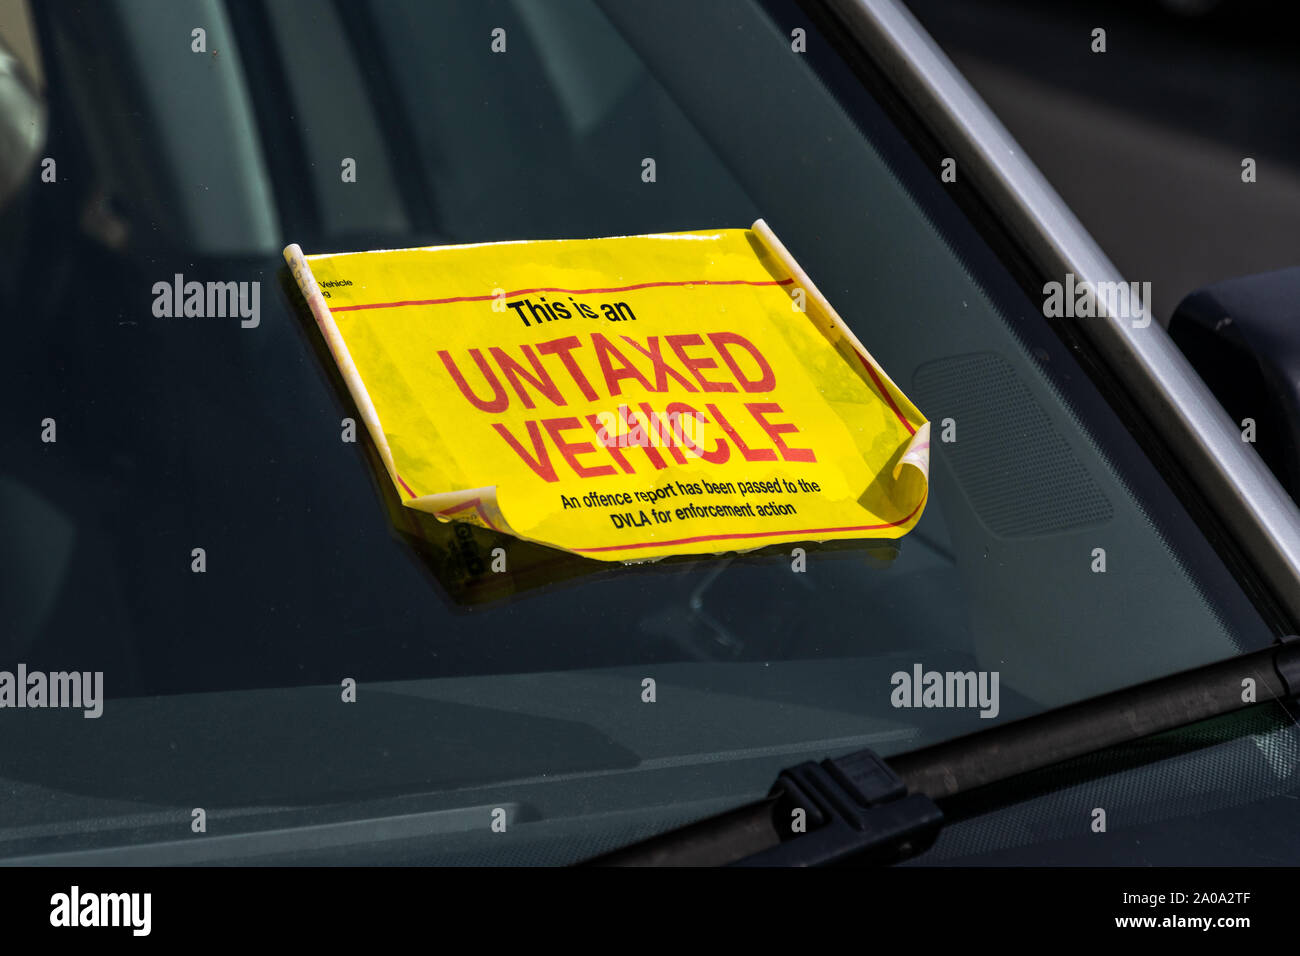 UK Untaxed Vehicle sticker on the windscreen of a parked car Stock Photo